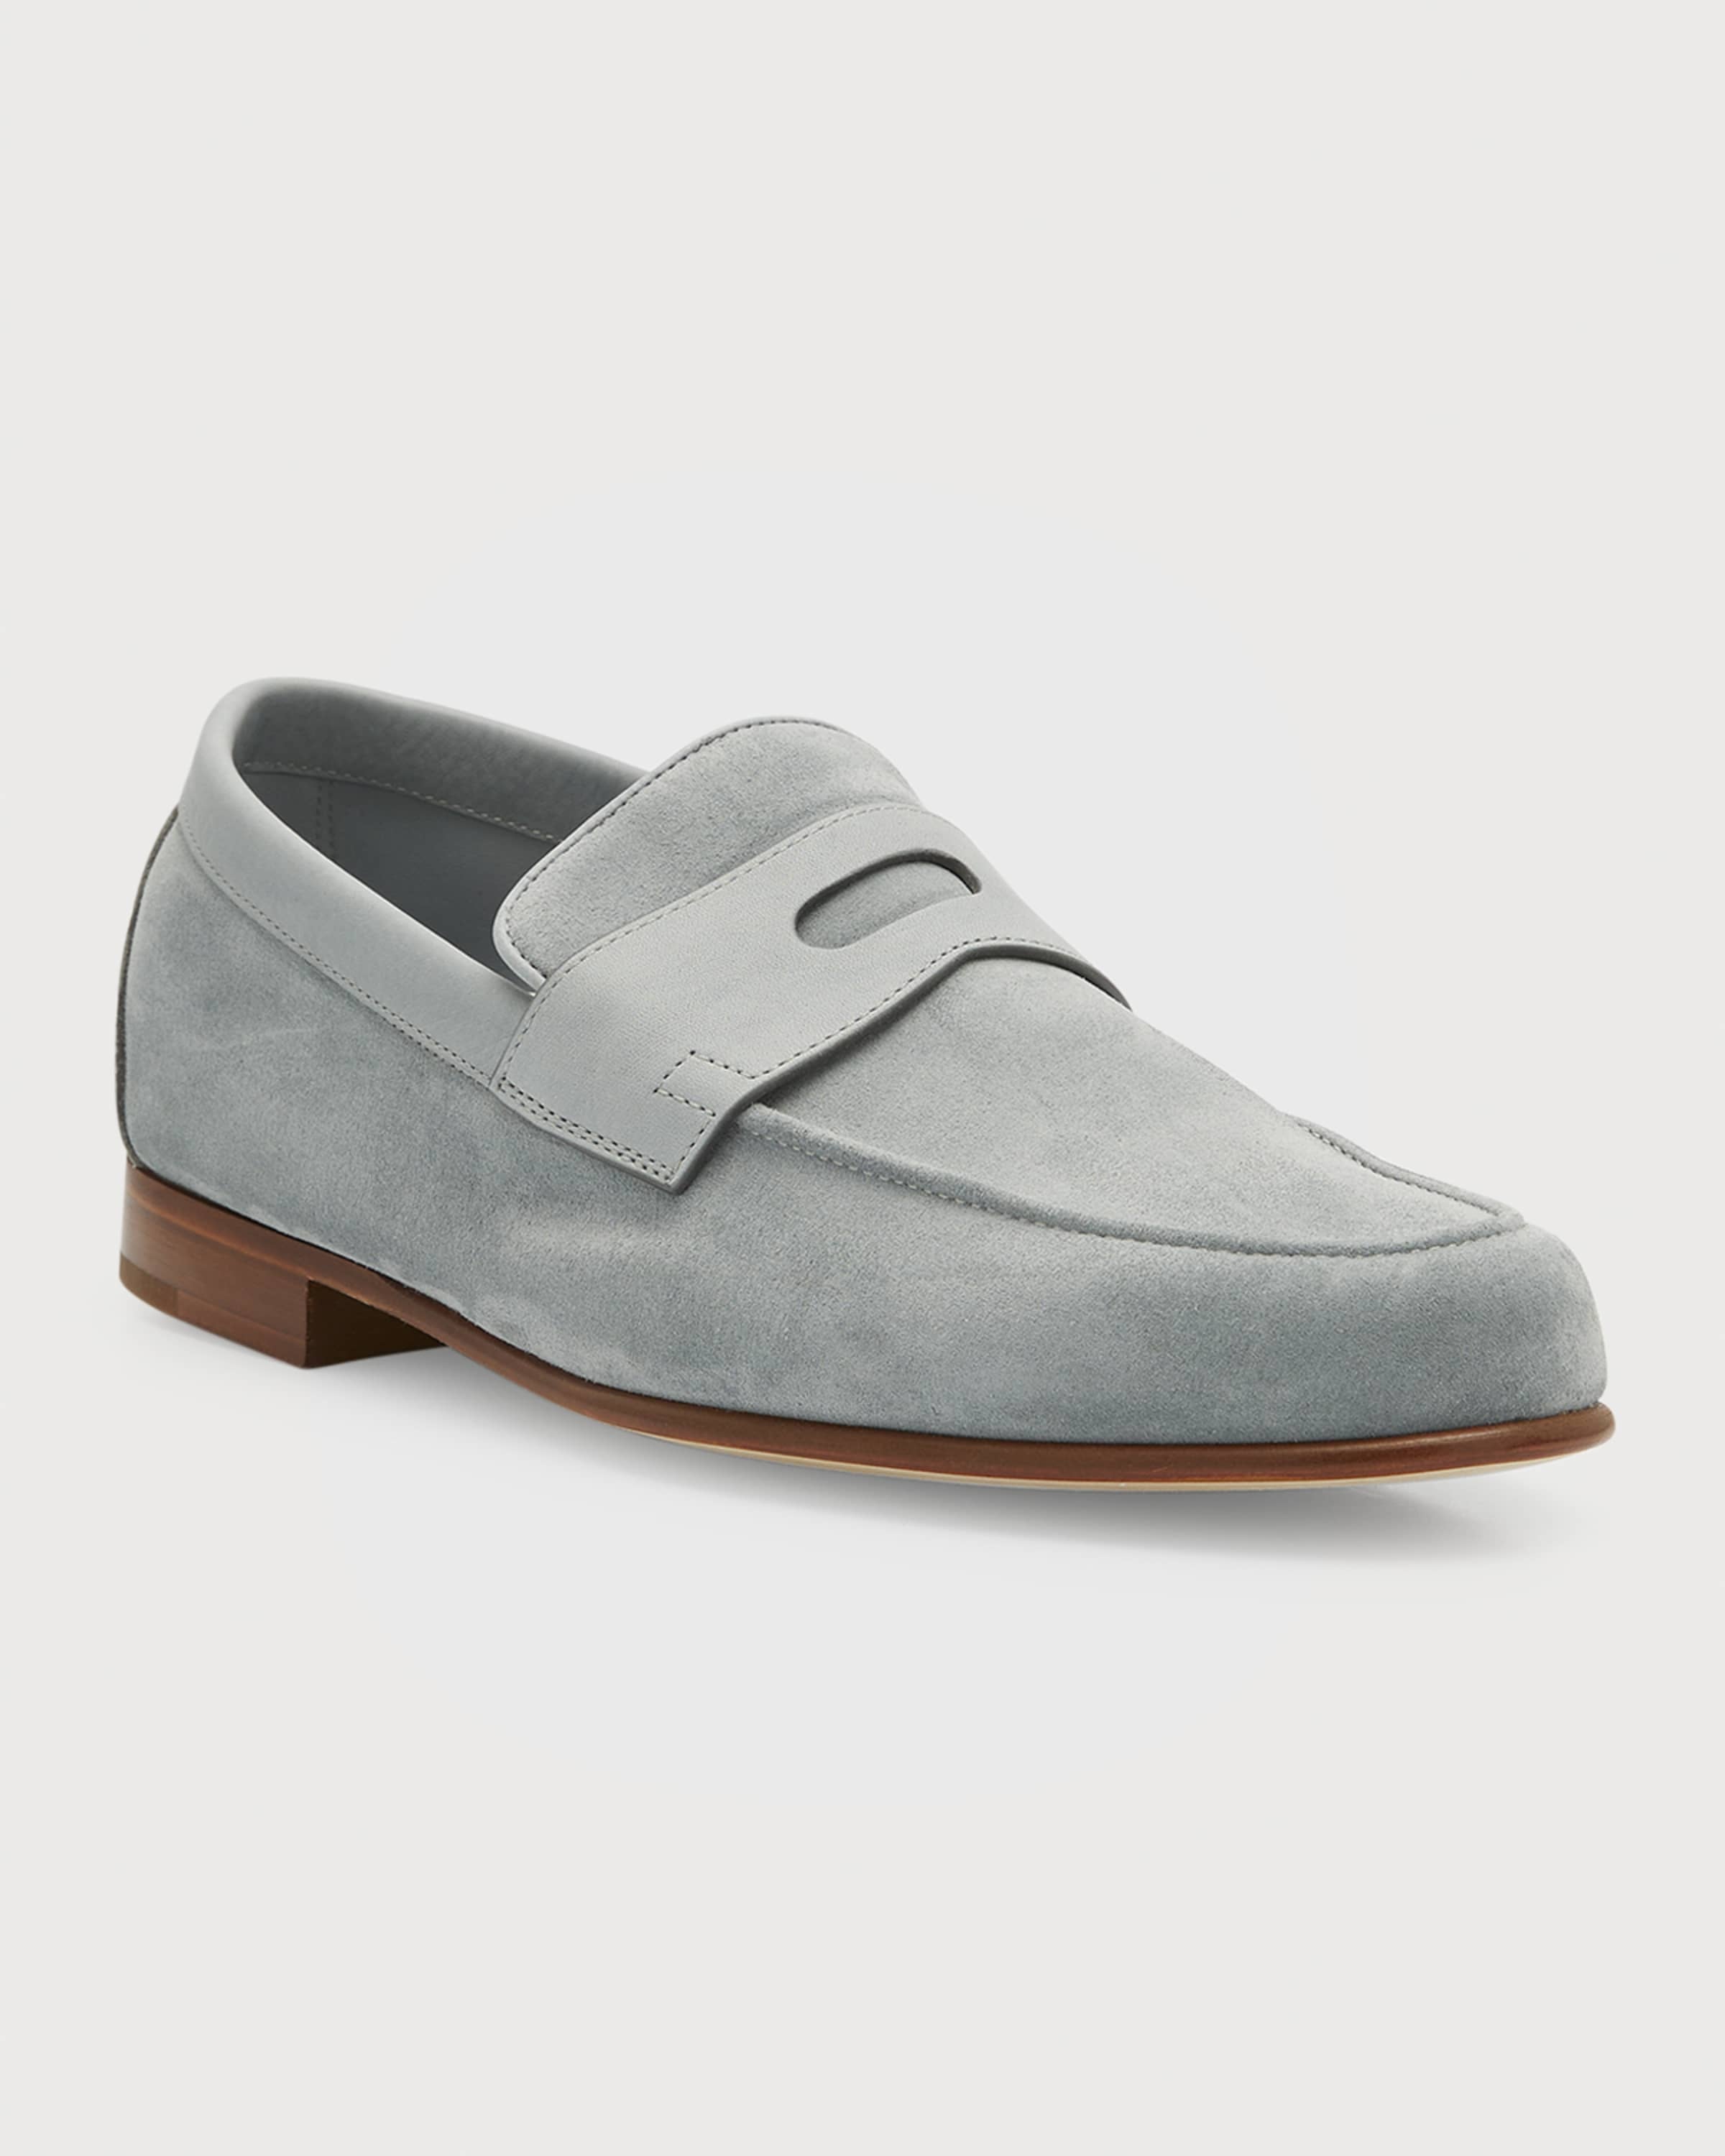 Men's Hendra Suede Penny Loafers - 3